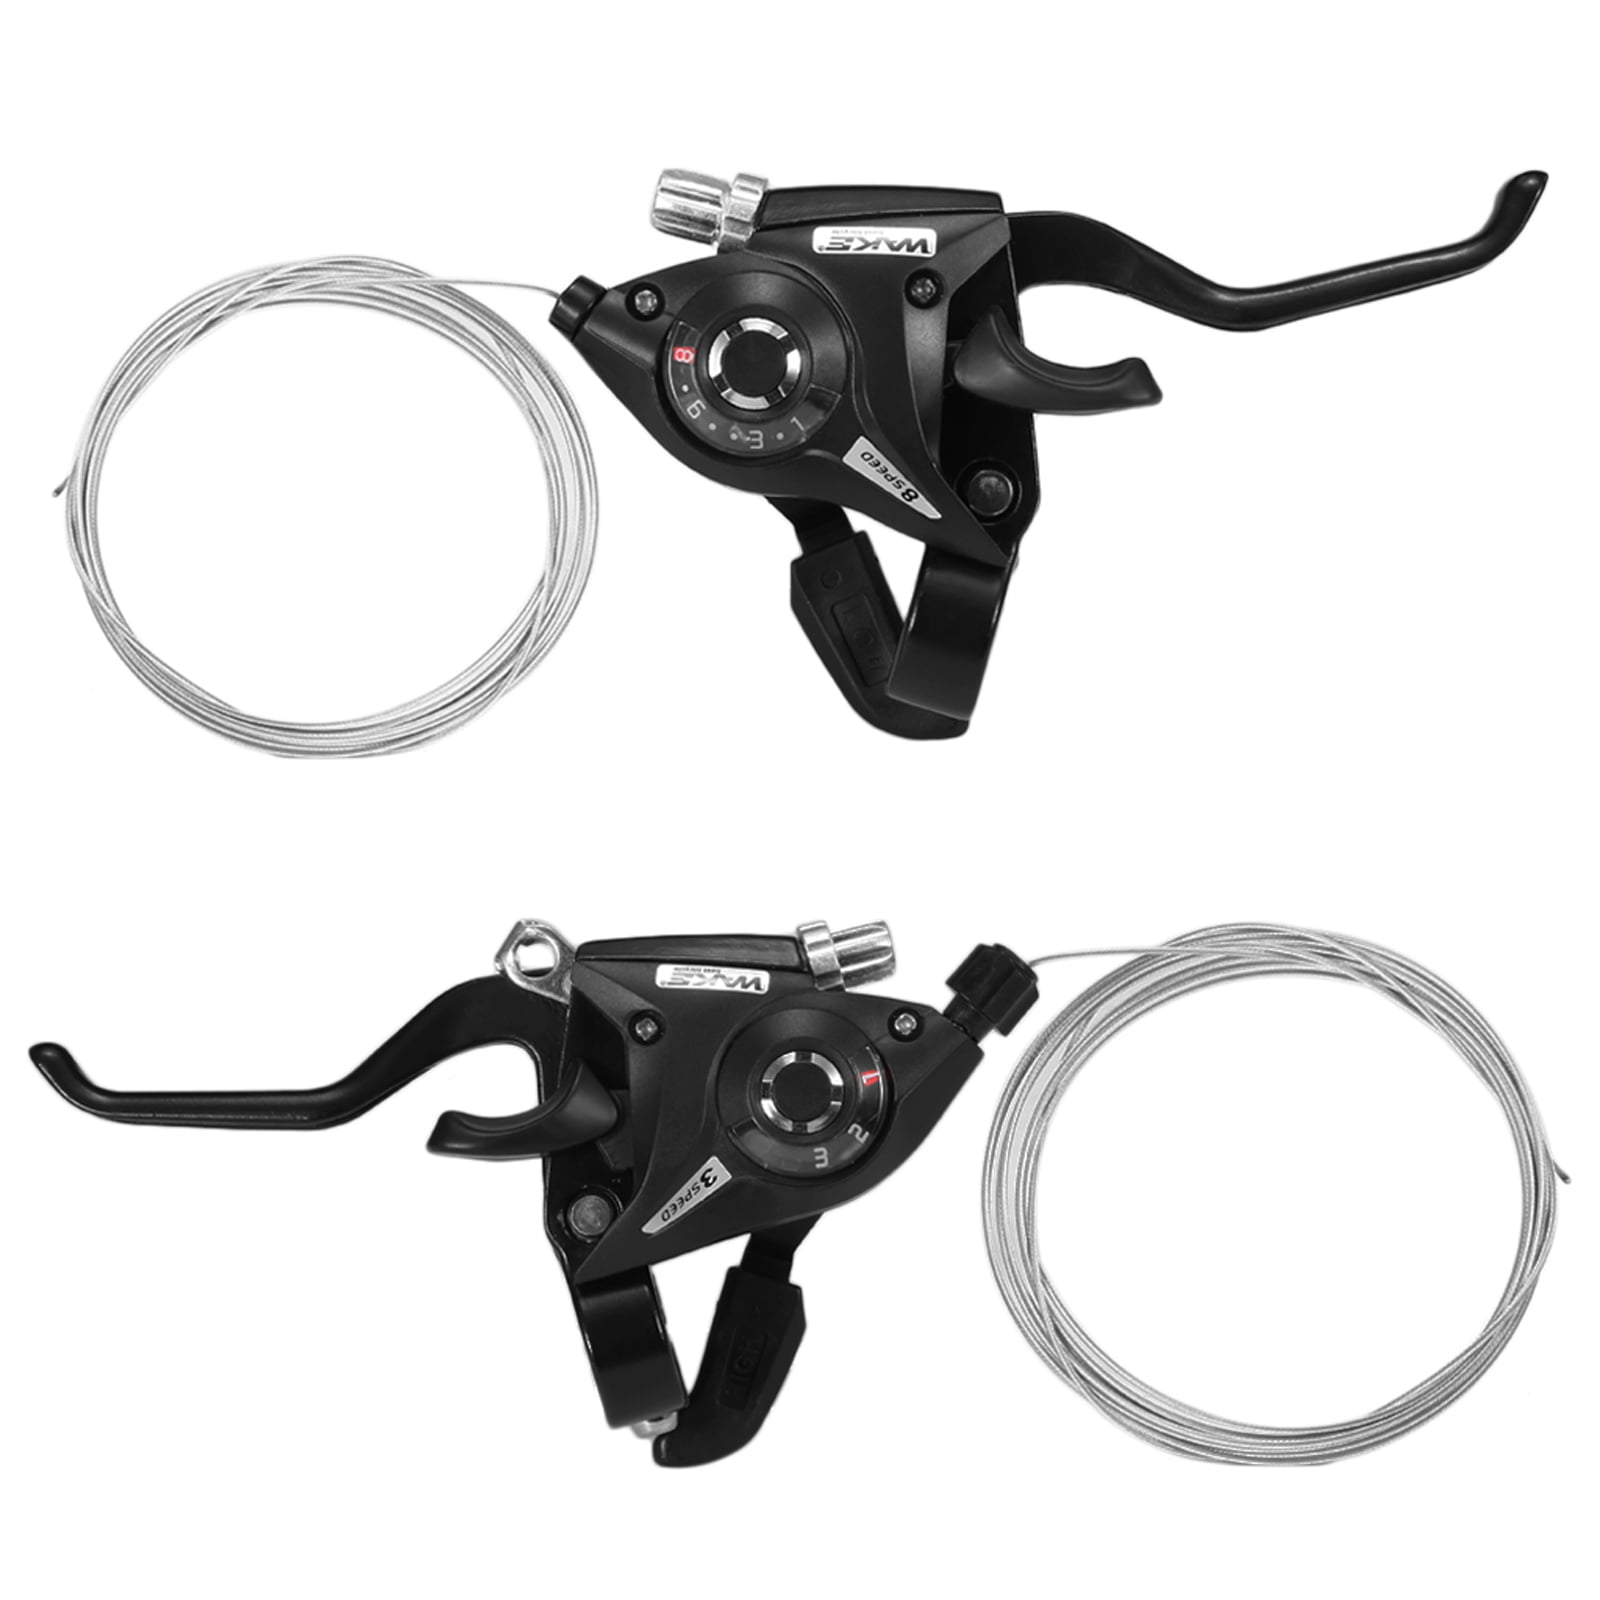 Thumb Speed Lever,Bike Shift Levers,Bicycle Left/Right Shifter MTB SL-TX30 6 Speed only- Right Shifter DATON Transmission Trigger Shifter 